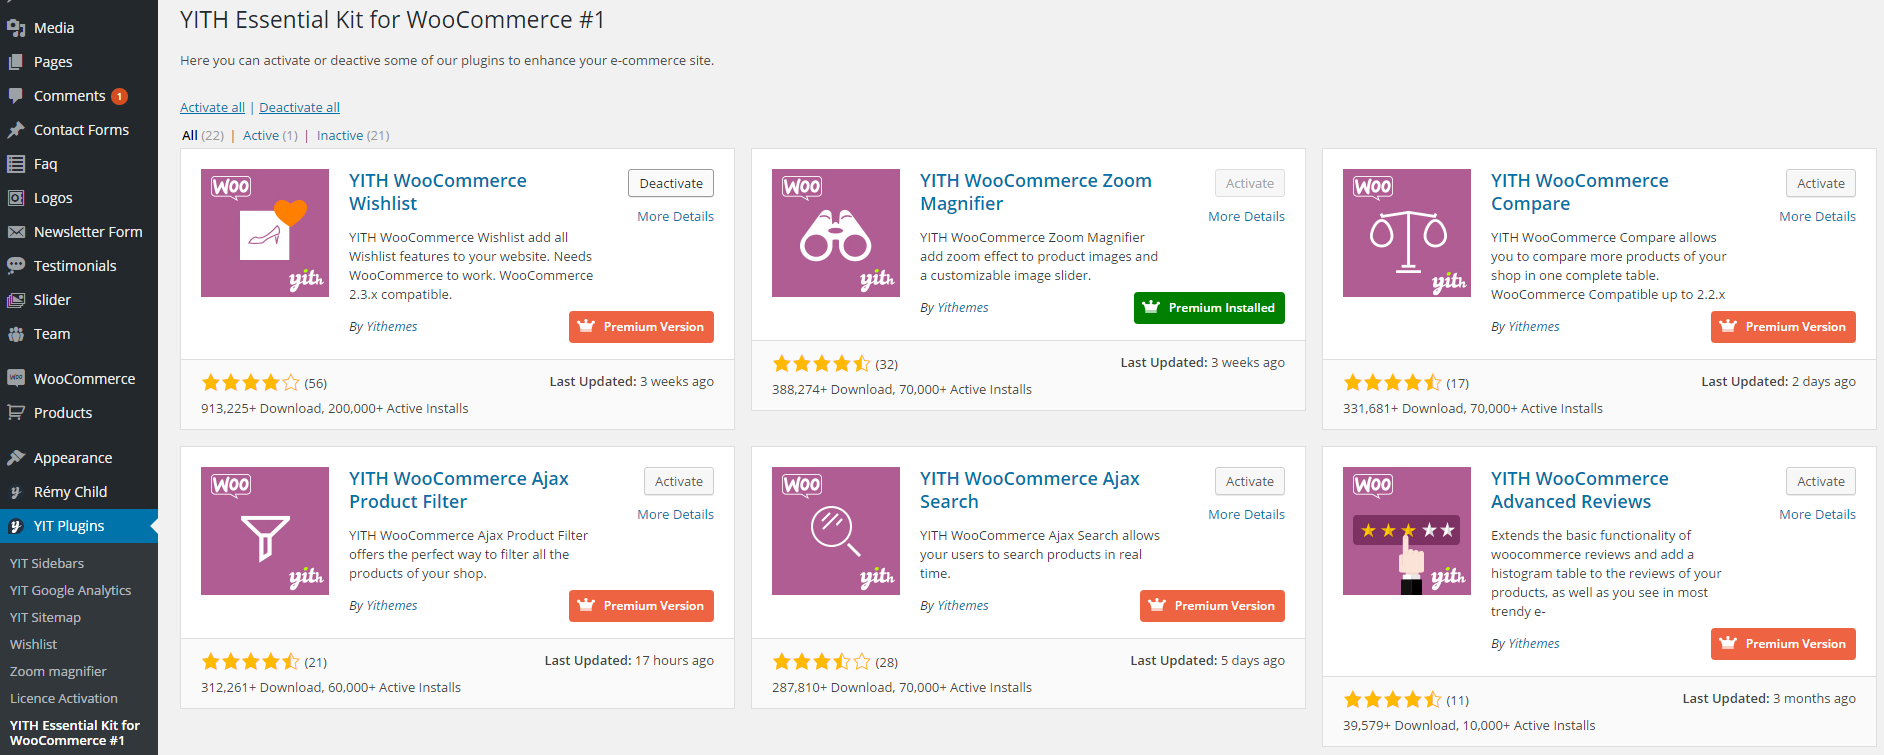 YITH Essential Kit for WooCommerce #1 Download Free WordPress Plugin